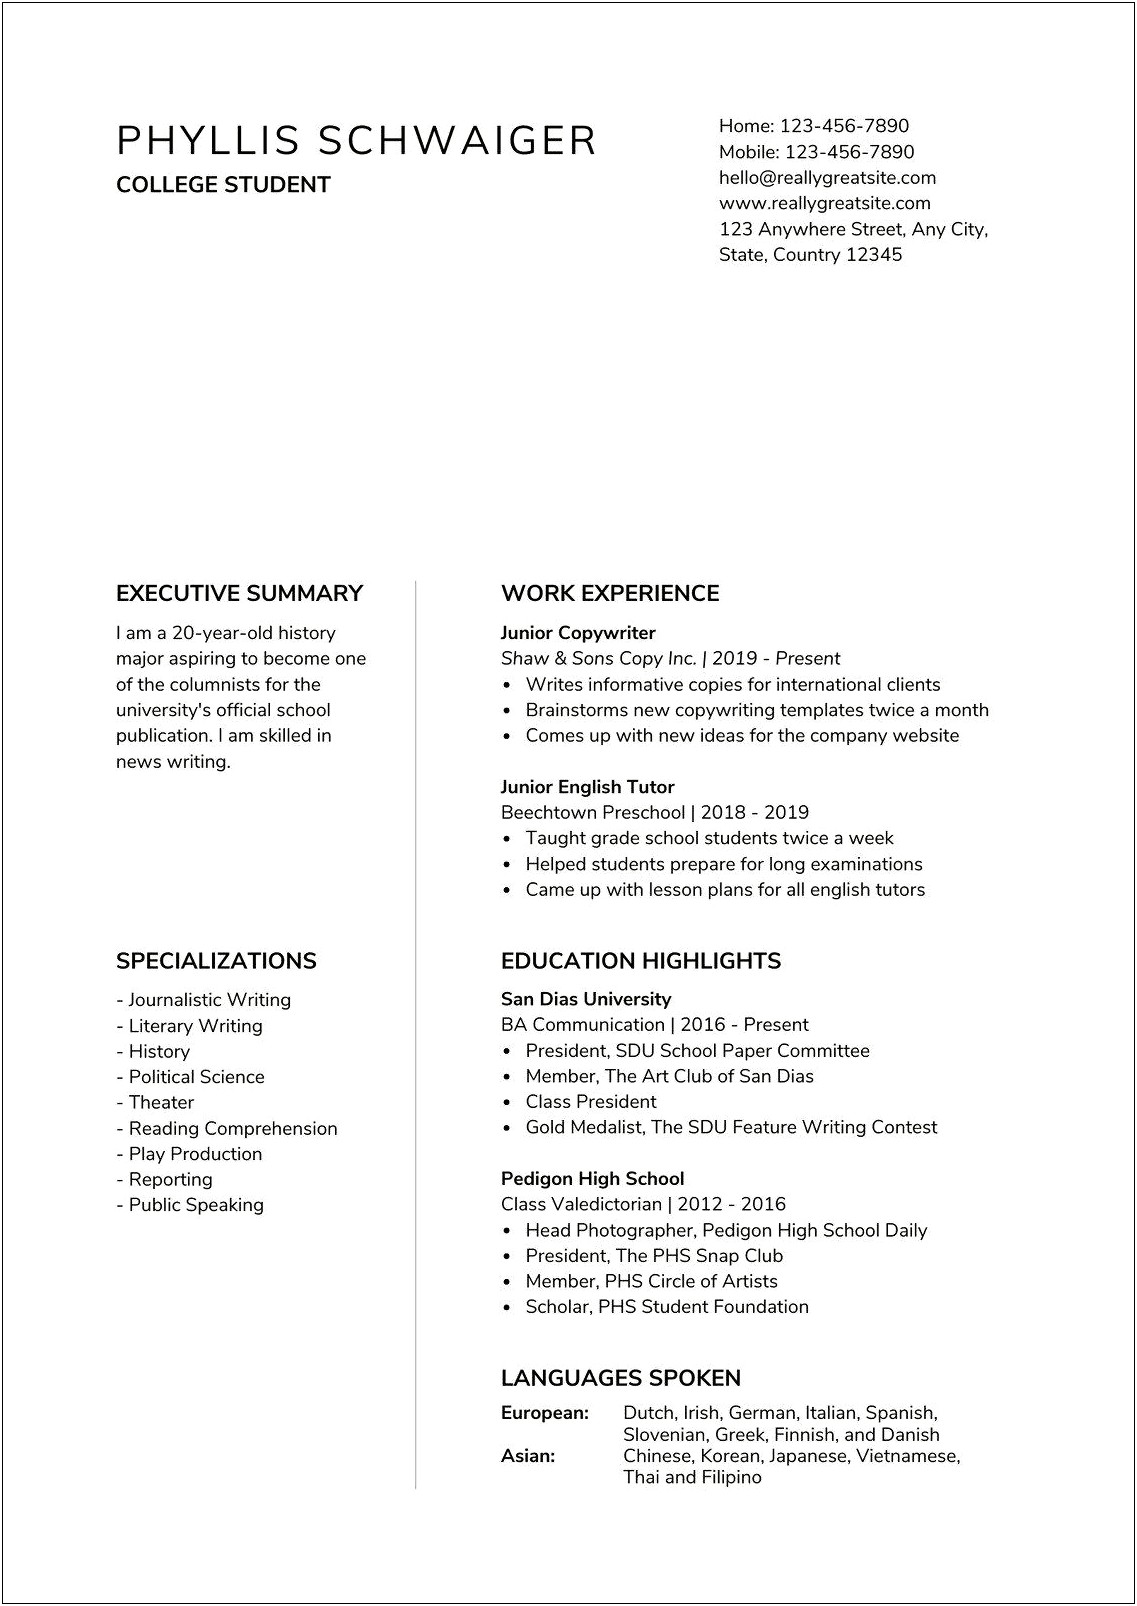 Best Resume For College Graduate After Months